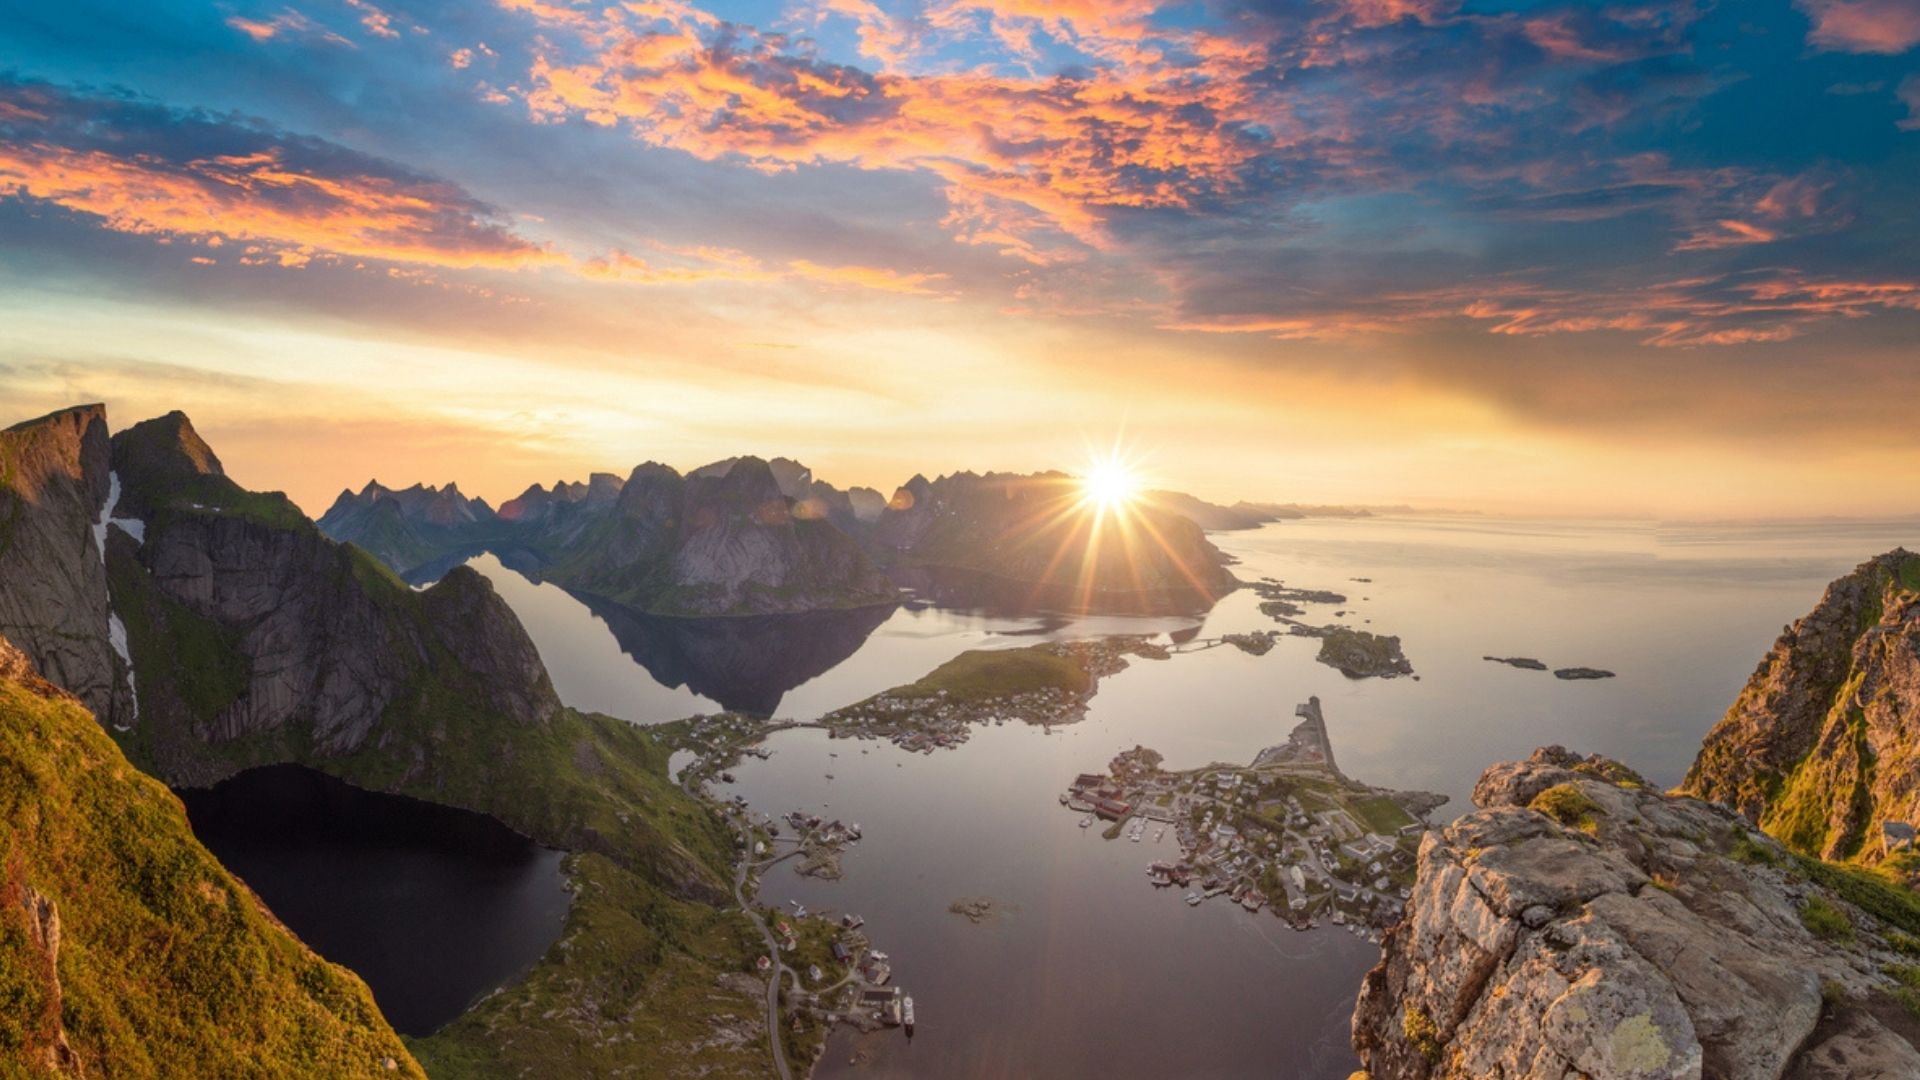 Private jet charter to Scandinavia for an exclusive Nordic adventure, exploring art and culture in Scandinavia, and witnessing the northern lights.